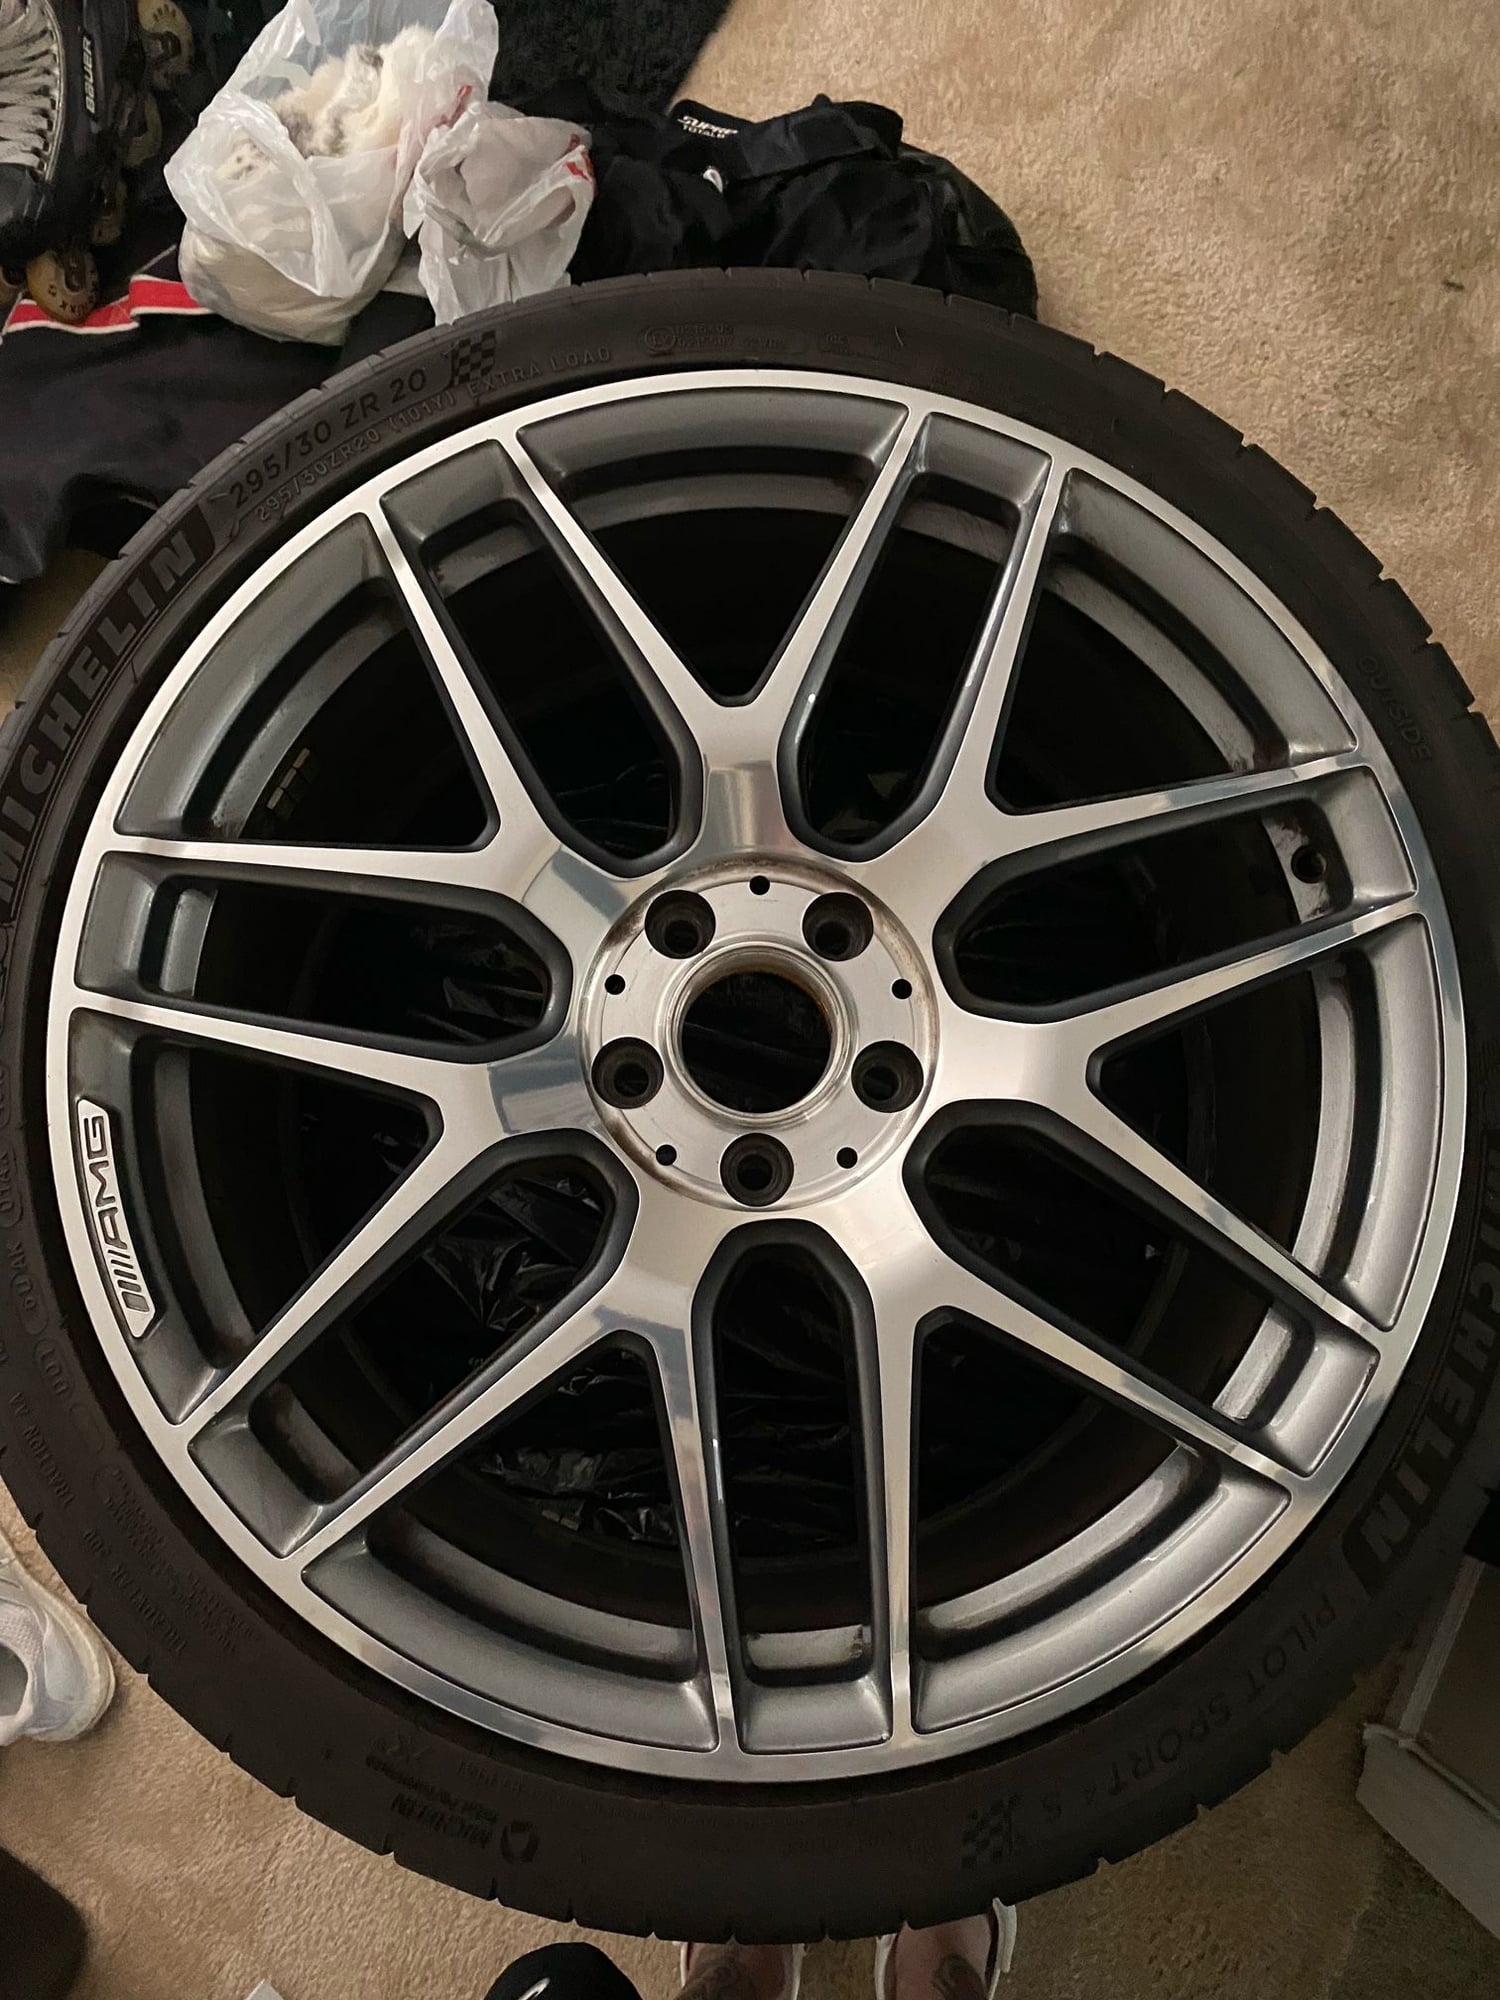 Wheels and Tires/Axles - FS: 2018 E63S 20inch AMG WHEELS/TIRES - Used - 2018 to 2021 Mercedes-Benz E63 AMG S - Schaumburg, IL 60193, United States